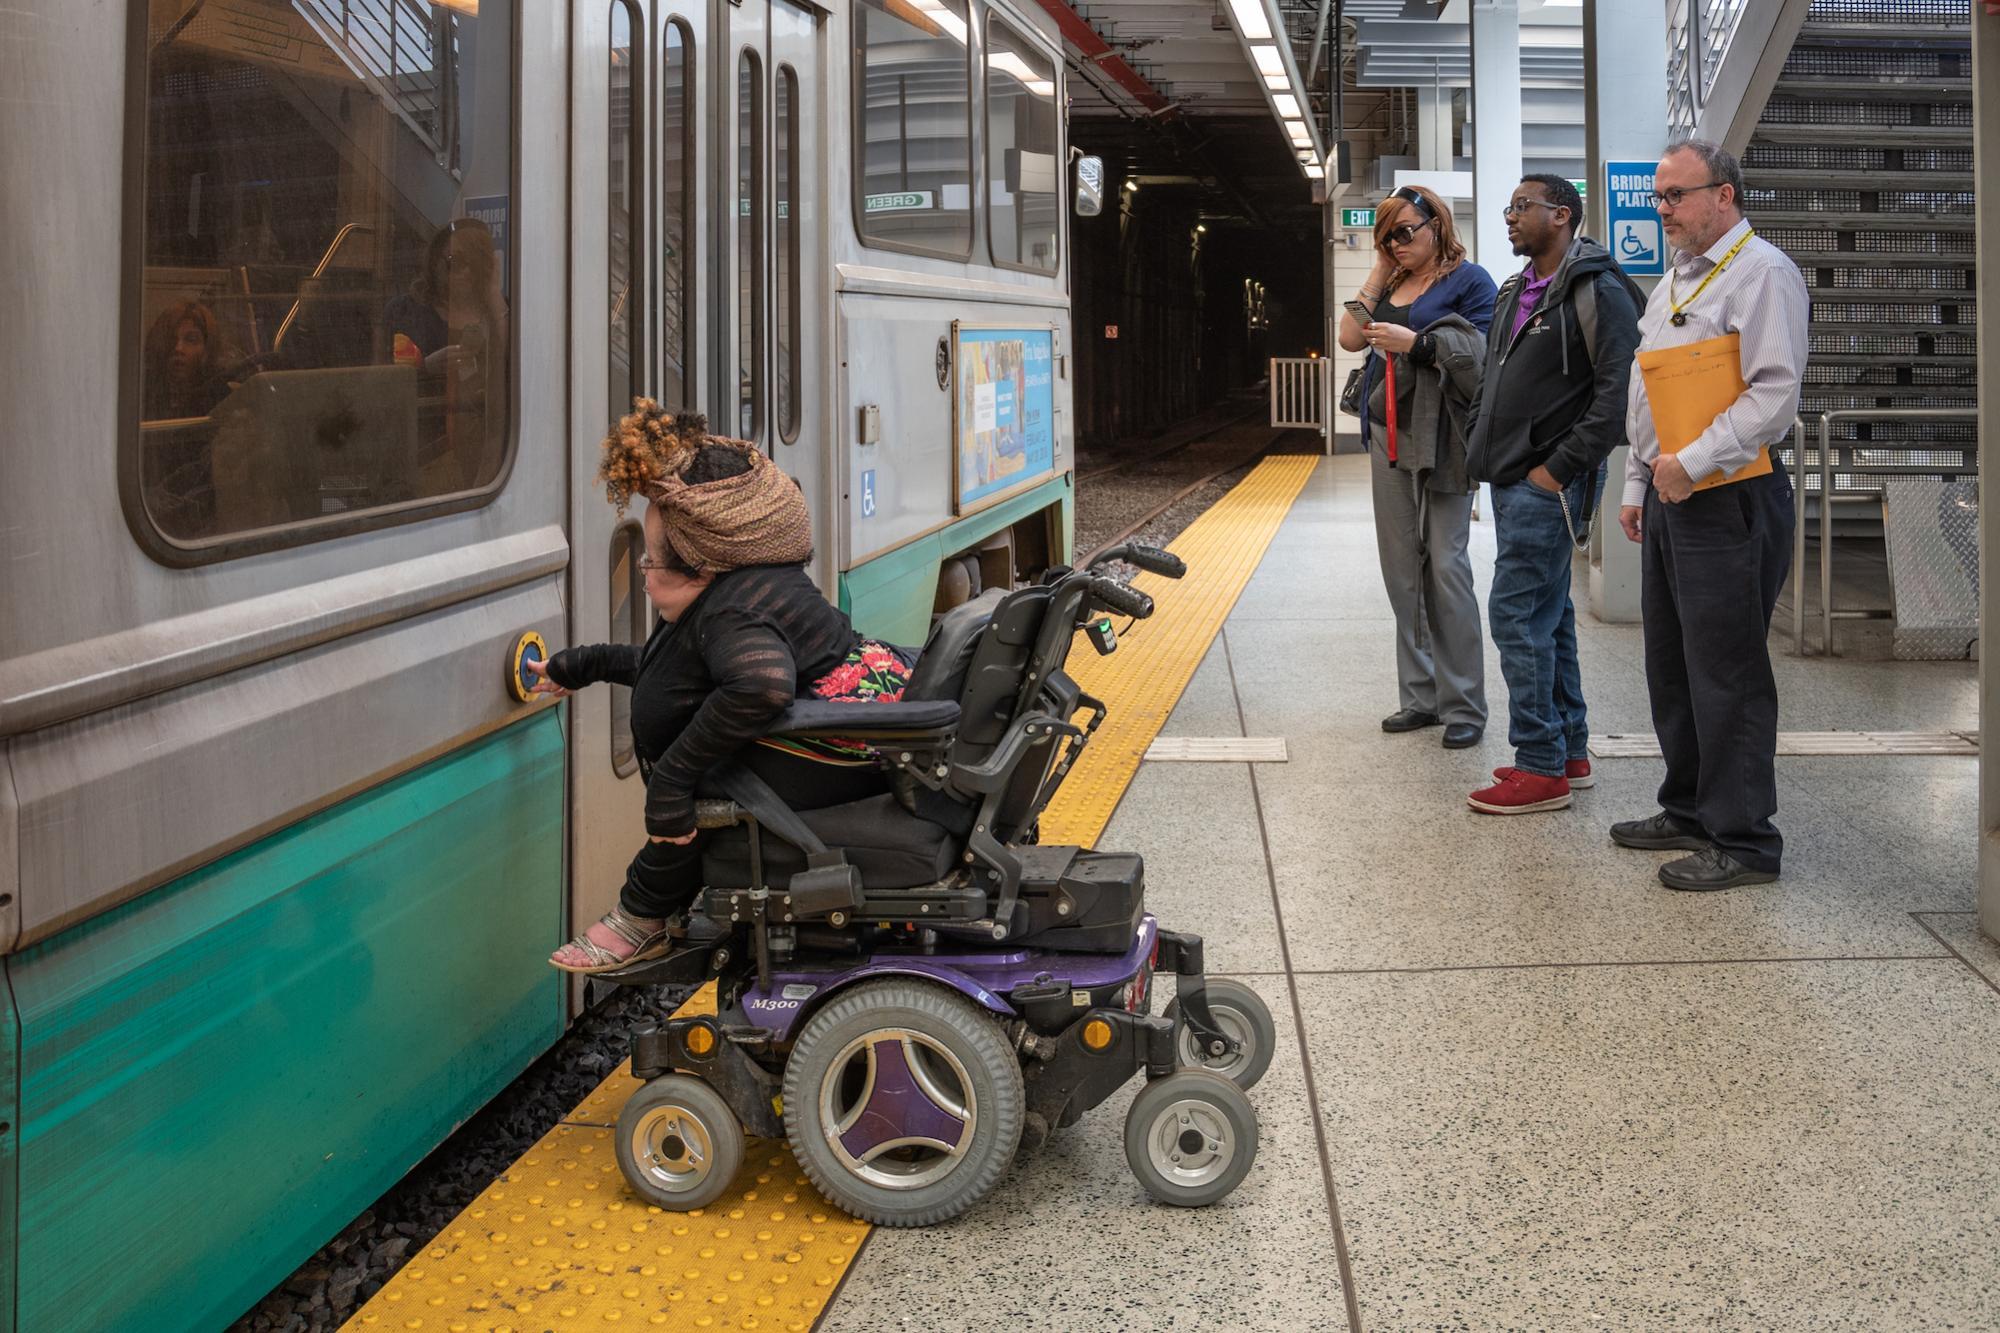 A person in a wheeled mobility device presses the accessibility button on a Green Line train at Government Center Station.